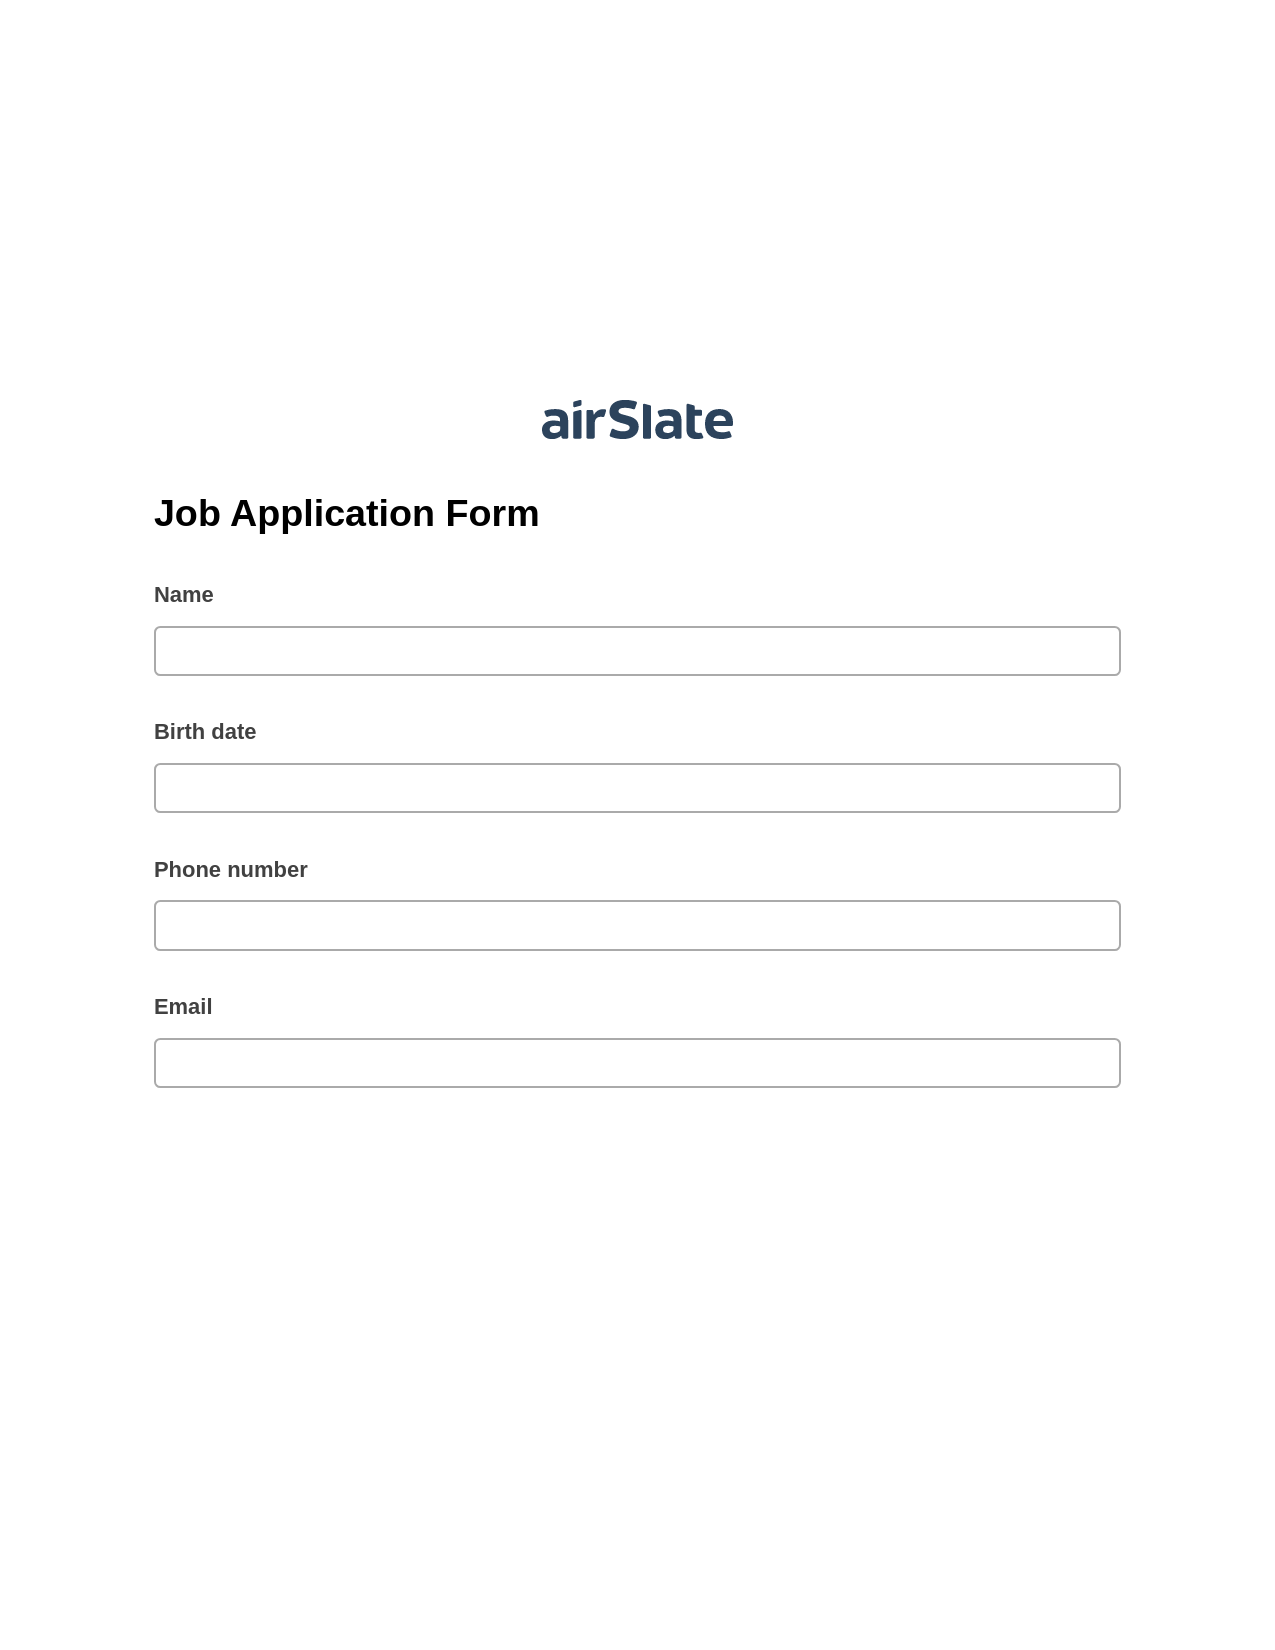 Multirole Job Application Form Pre-fill Slate from MS Dynamics 365 Records Bot, Create Slate every Google Sheet Update Bot, Archive to SharePoint Folder Bot